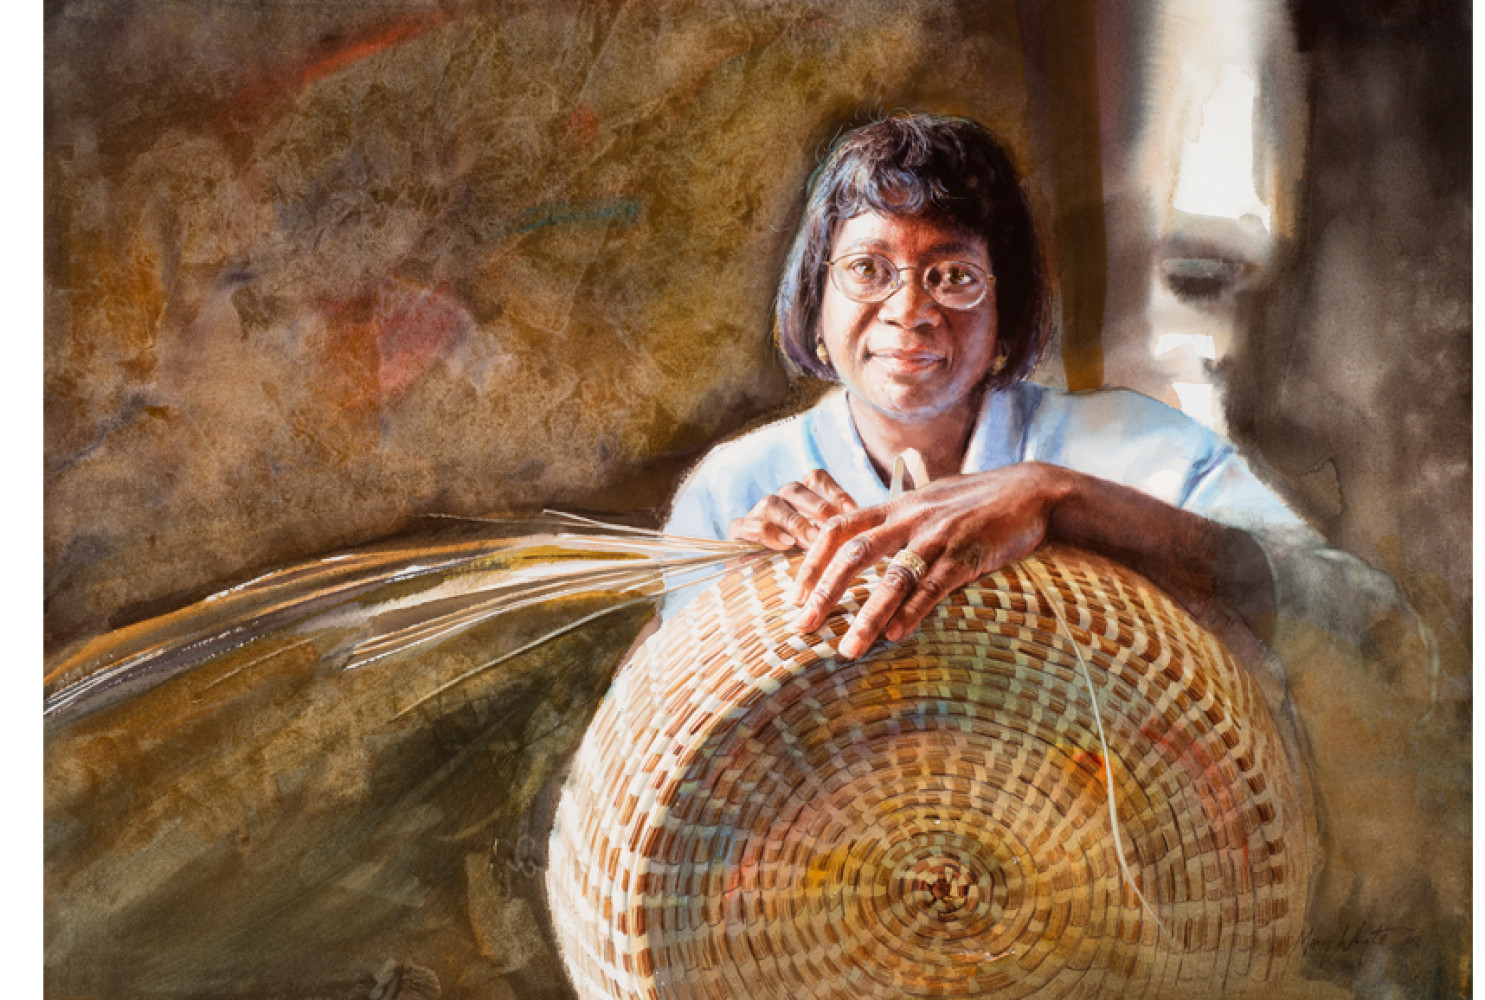 Mary Jackson, 2002, by Mary Whyte (American, b. 1953); watercolor on paper; 21 x 28 1/2 inches; Gift of Cathy and Ben Marino